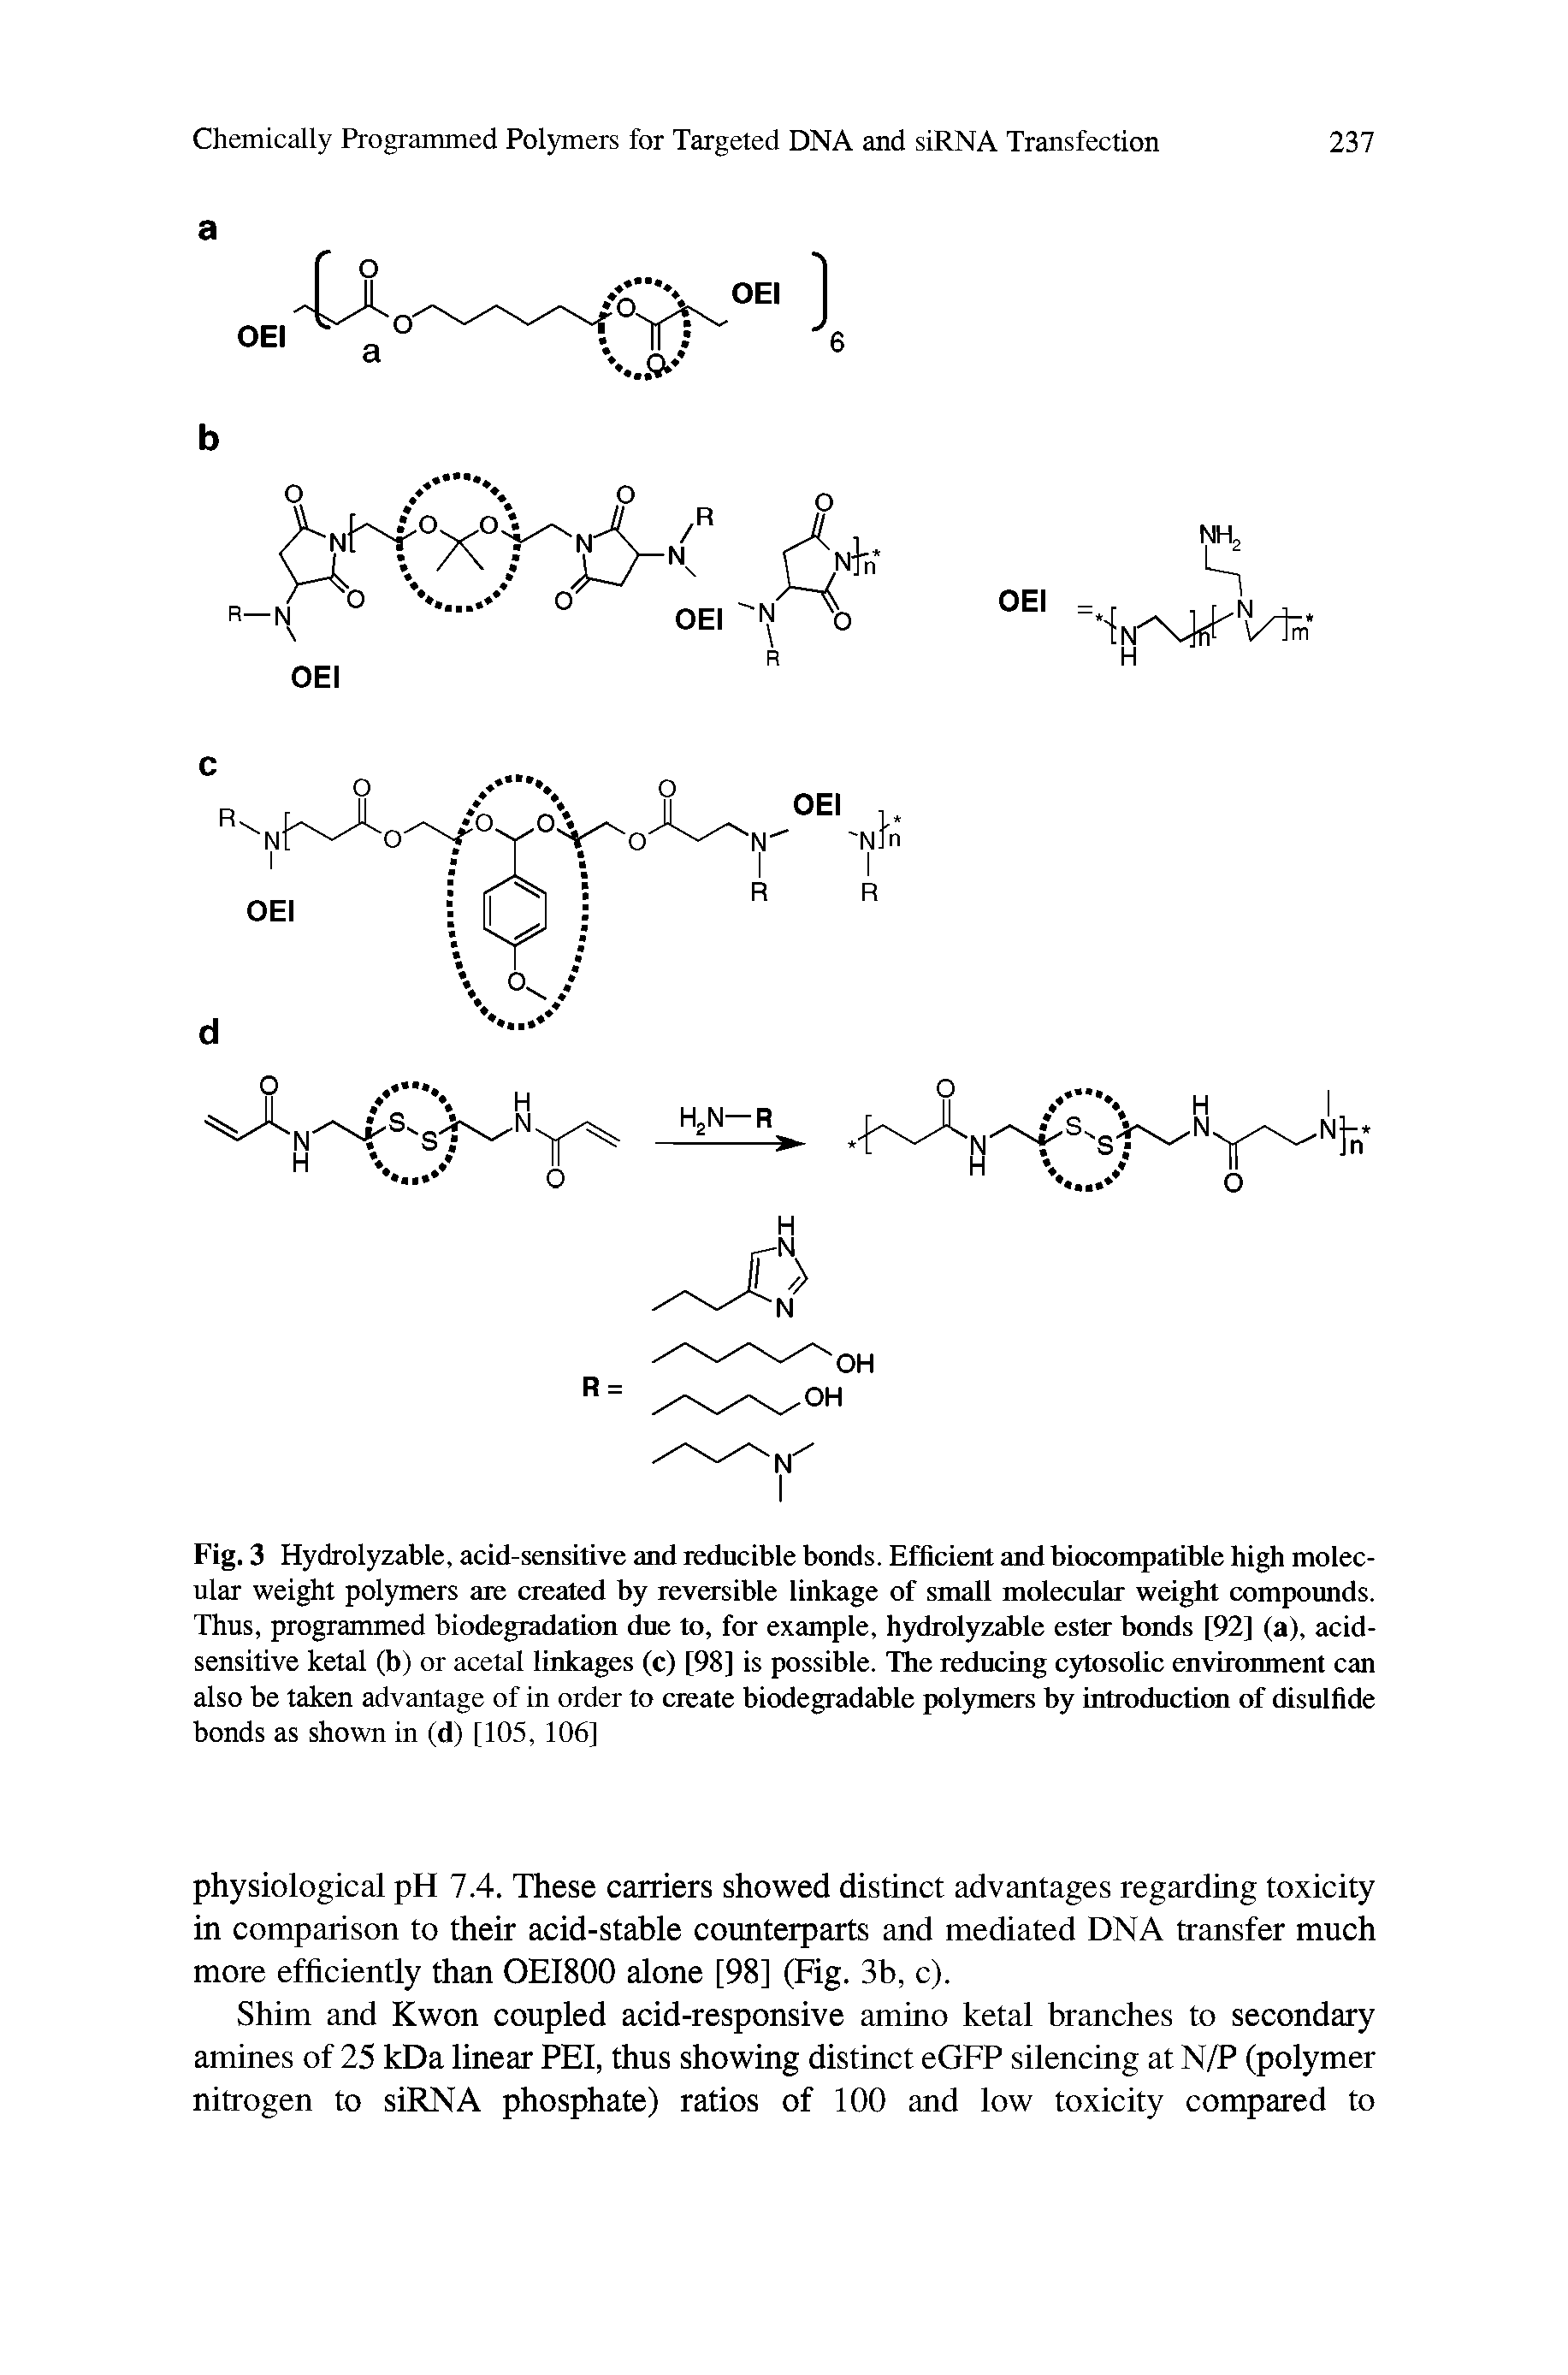 Fig. 3 Hydrolyzable, acid-sensitive and reducible bonds. Efficient and biocompatible high molecular weight polymers are created by reversible linkage of small molecular weight compounds. Thus, programmed biodegradation due to, for example, hydrolyzable ester bonds [92] (a), acid-sensitive ketal (b) or acetal linkages (c) [98] is possible. The reducing cytosolic environment can also be taken advantage of in order to create biodegradable polymers by introduction of disulfide bonds as shown in (d) [105, 106]...